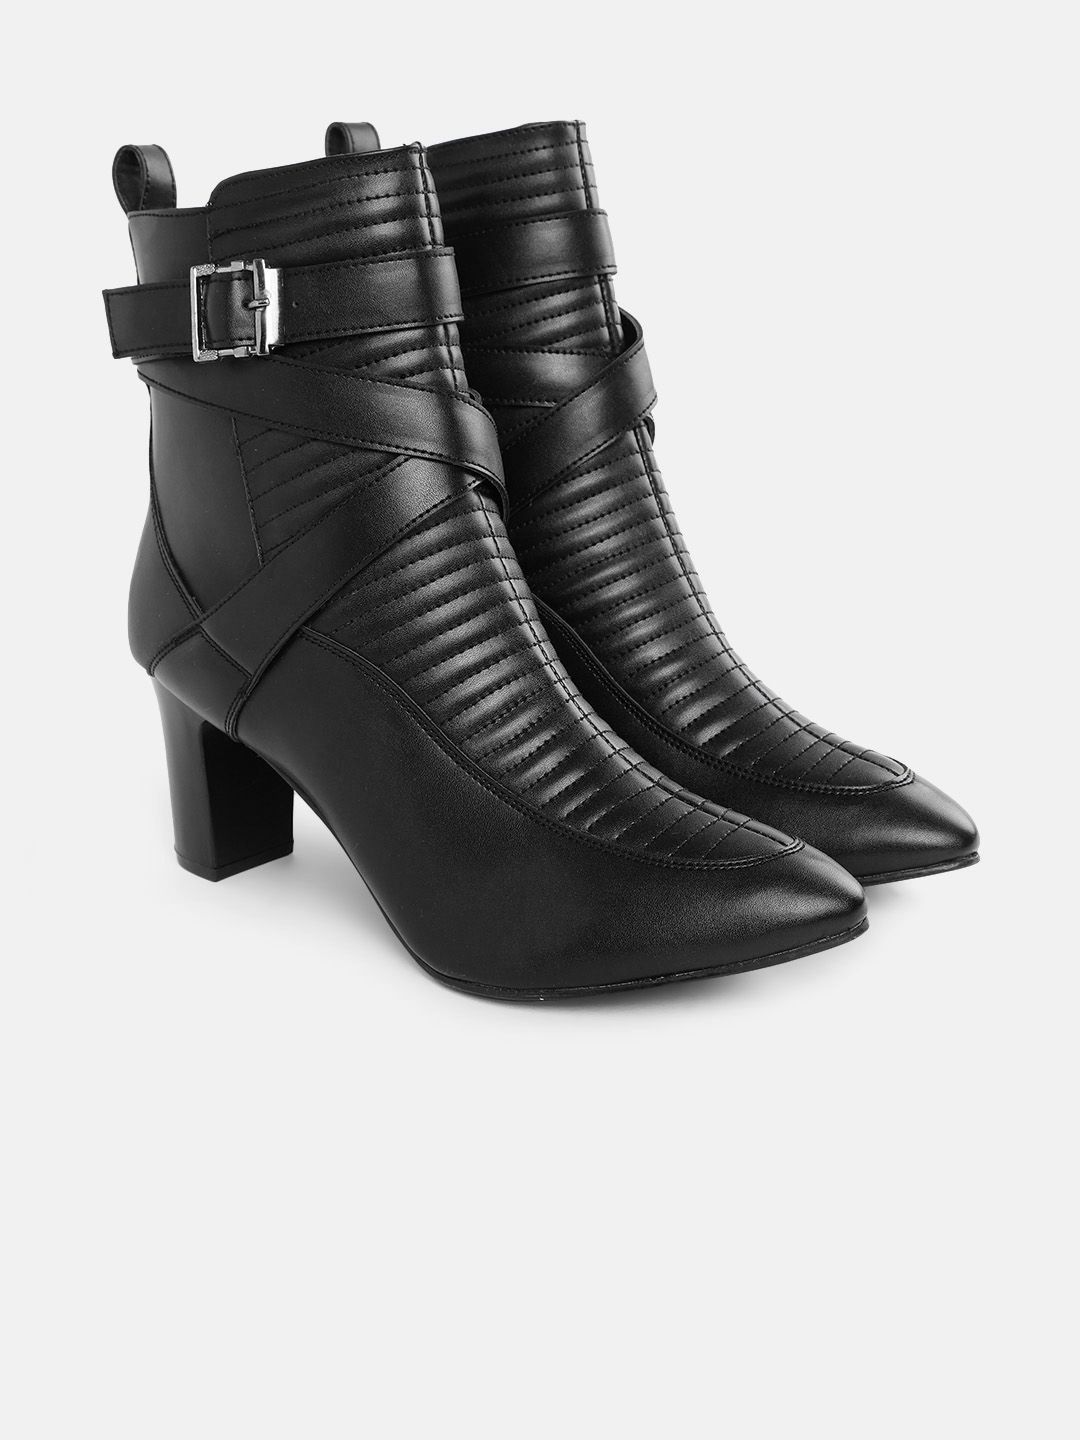 CORSICA Women Black Textured Block Heeled Boots with Buckles Detail Price in India